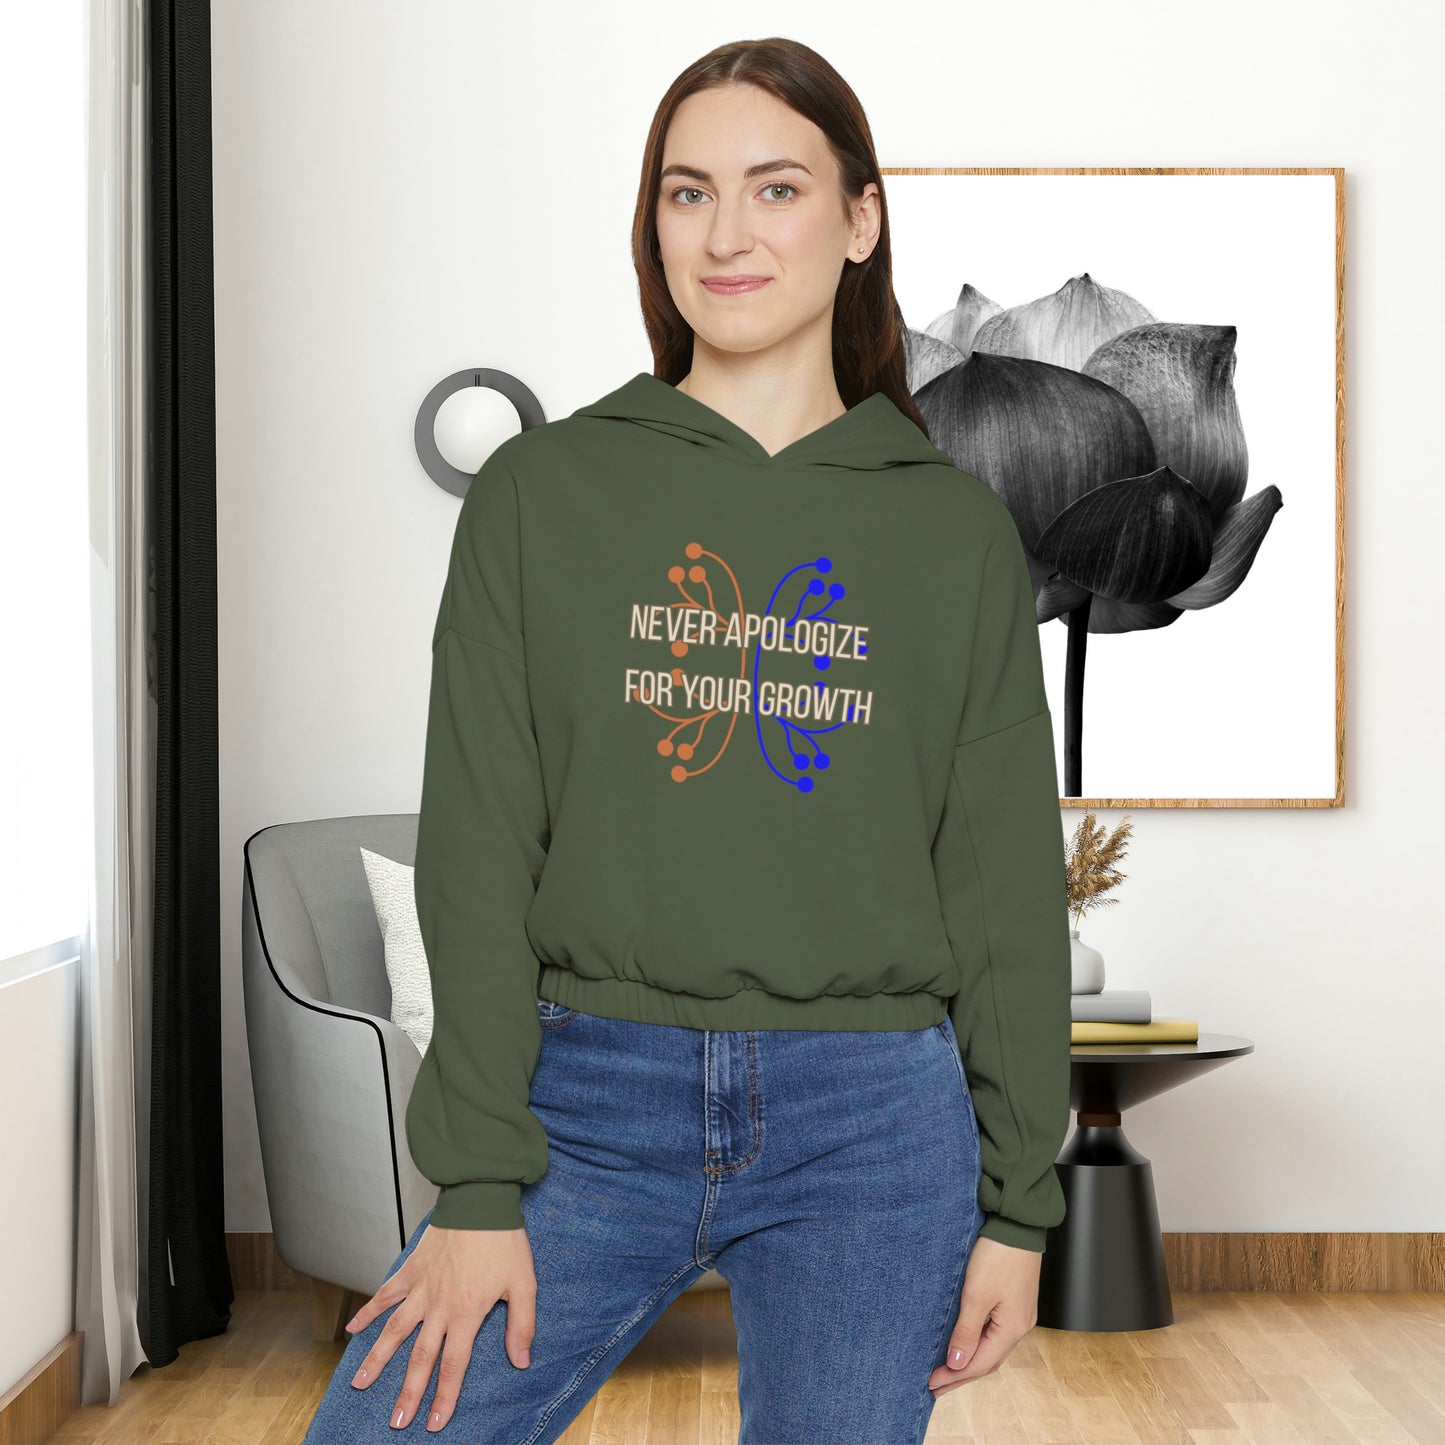 Never apologize for your growth is the message on this Women's Cinched Bottom Hoodie. Go and keep growing!